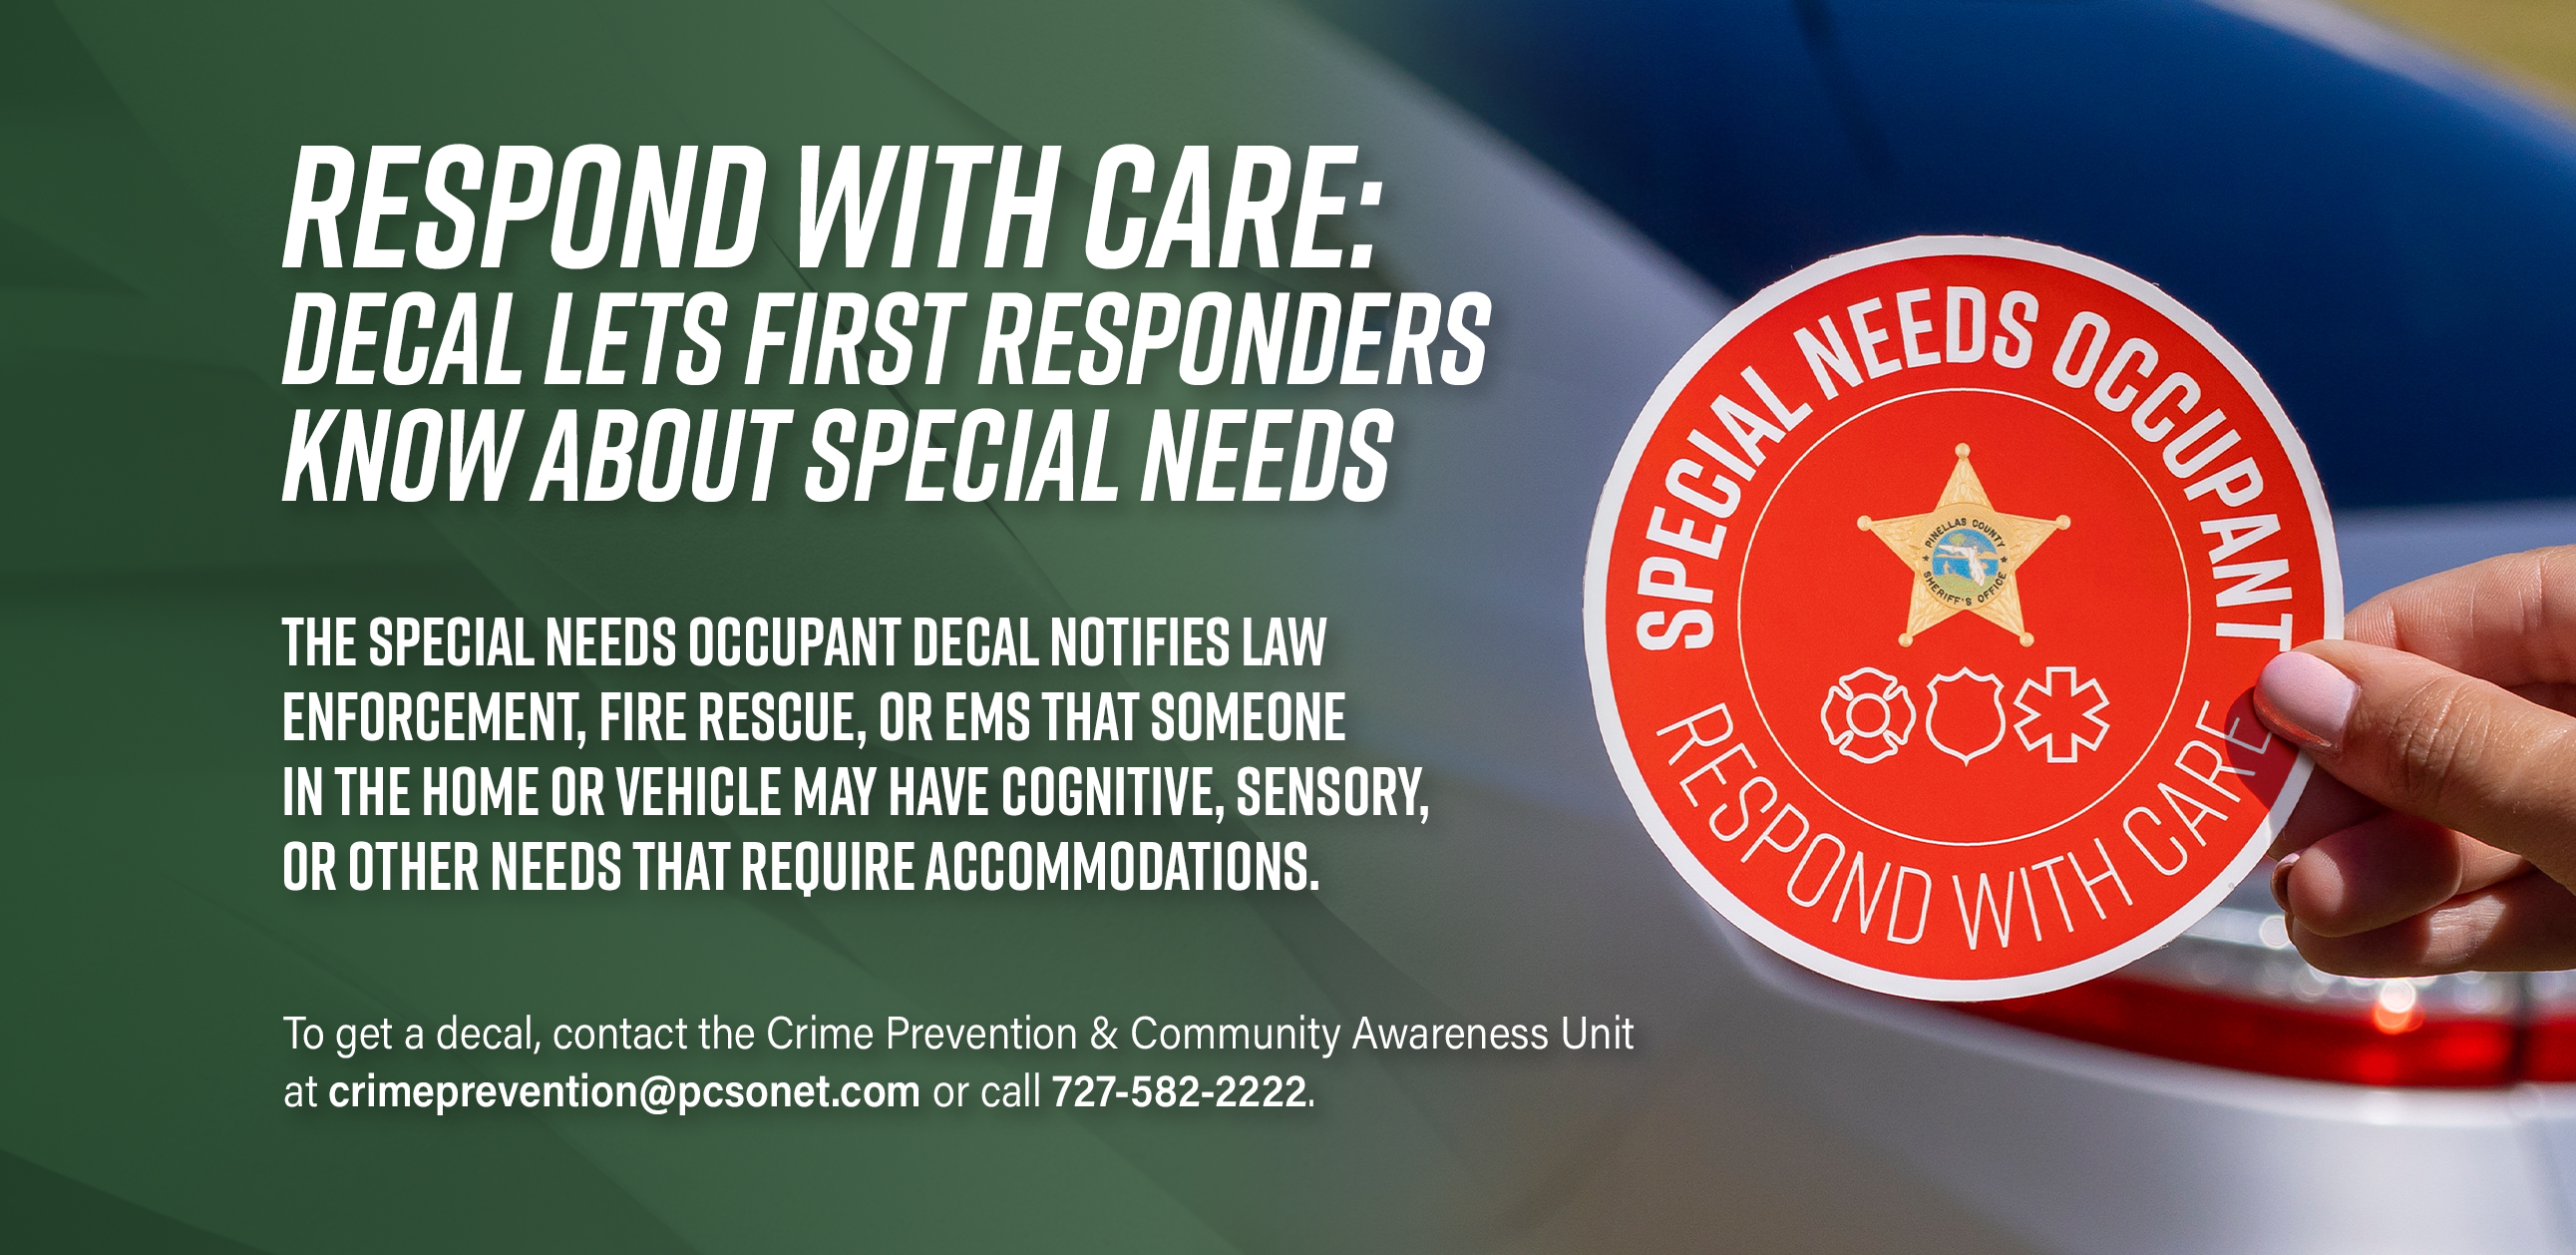 Respond with care: decal lets first responders know about special needs. The special needs occupant decal notifies law enforcement, fire rescue, or EMS that someone in the home or vehicle may have cognitive , sensory, or other needs that require accommodations. To get a decal, contact the Crime Prevention and Community awareness unit at crimeprevention@pcsonet.com or call 7275822222